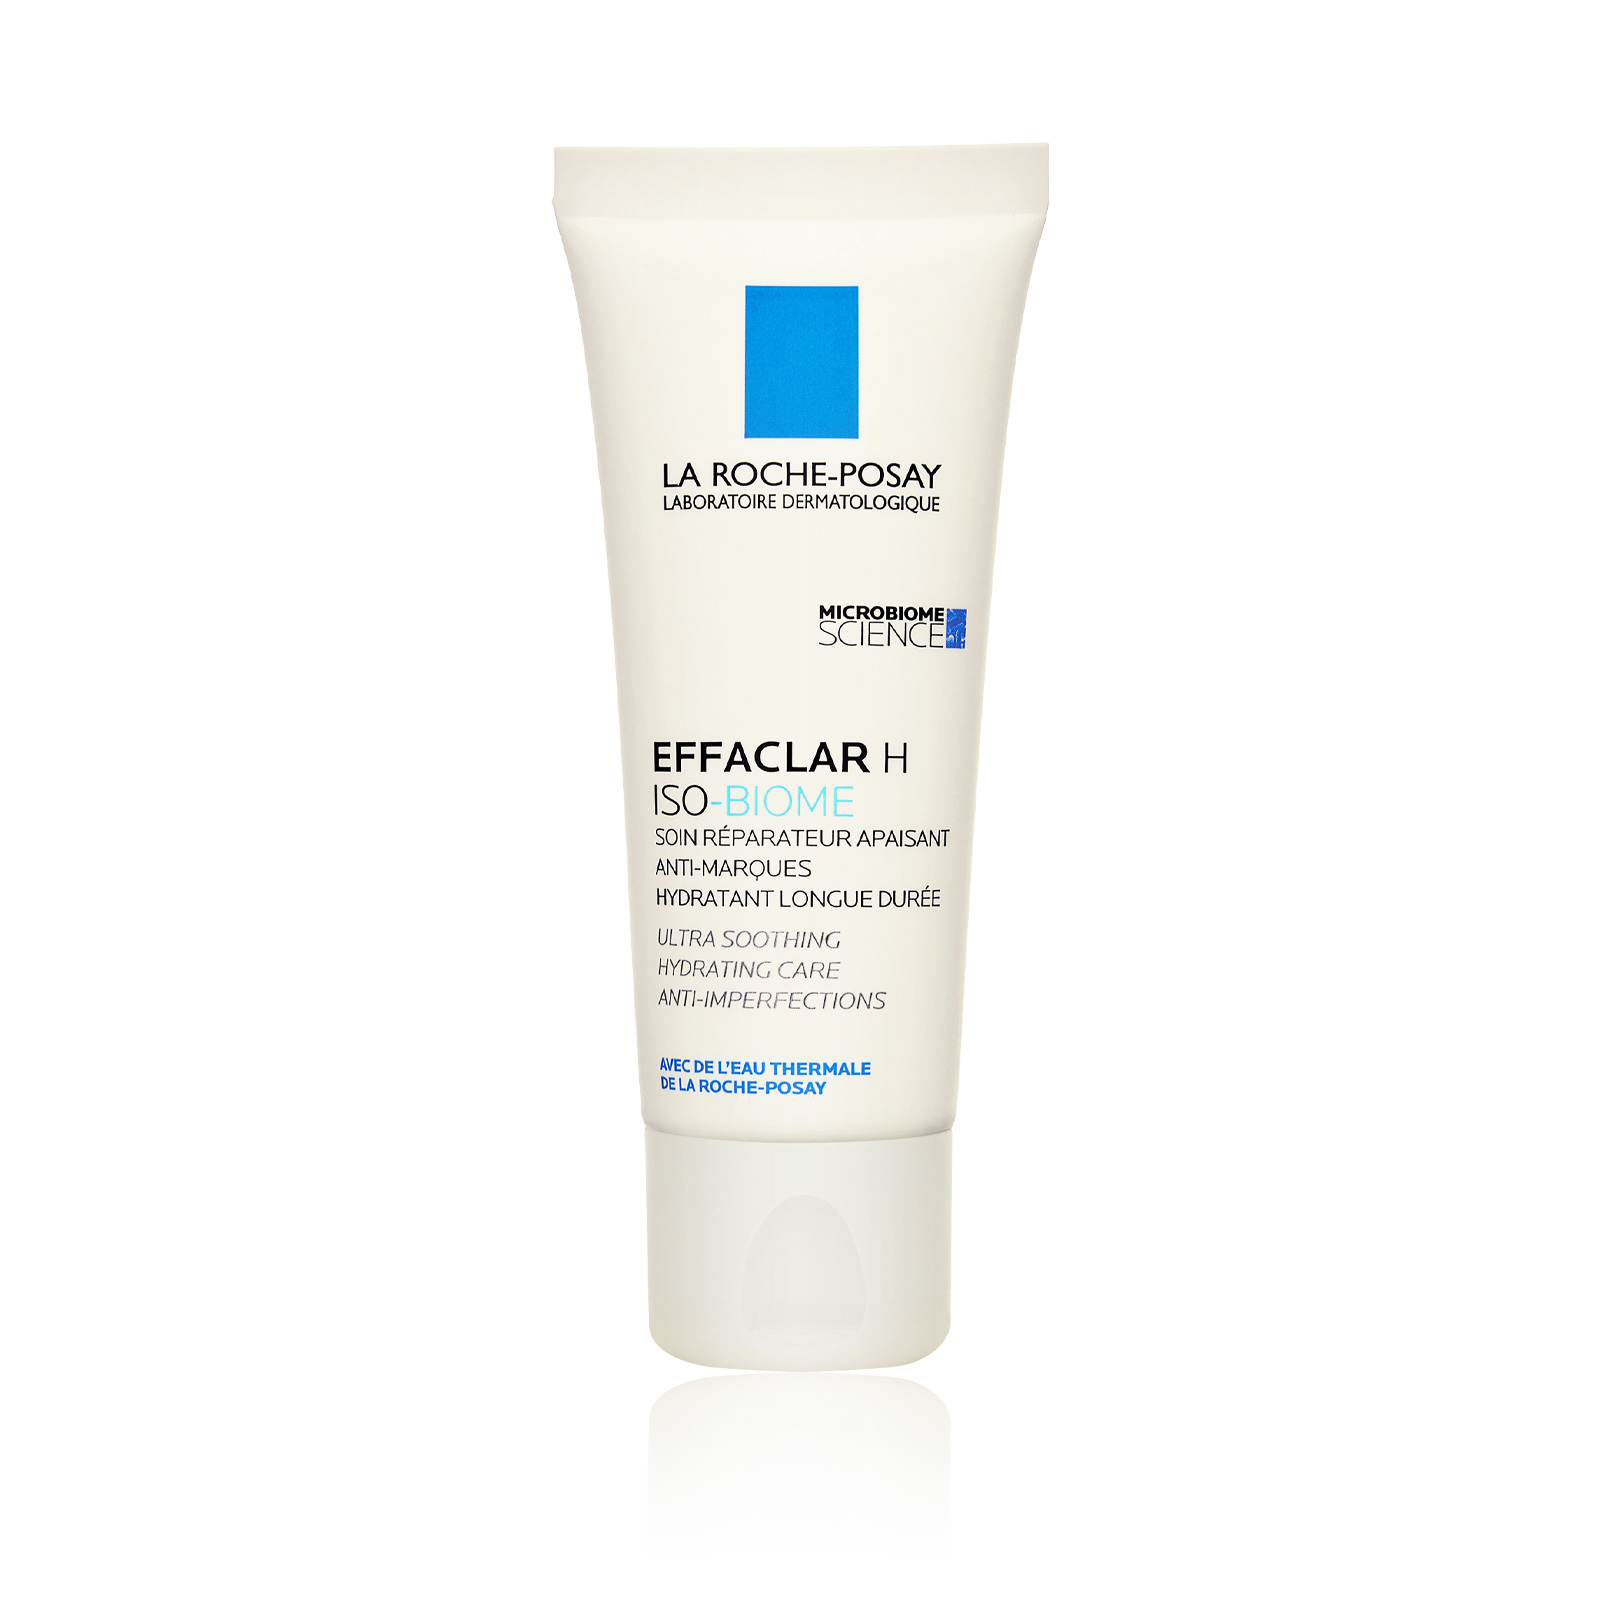 Effaclar H Iso-Biome Ultra Soothing Hydrating Care Anti-Imperfections